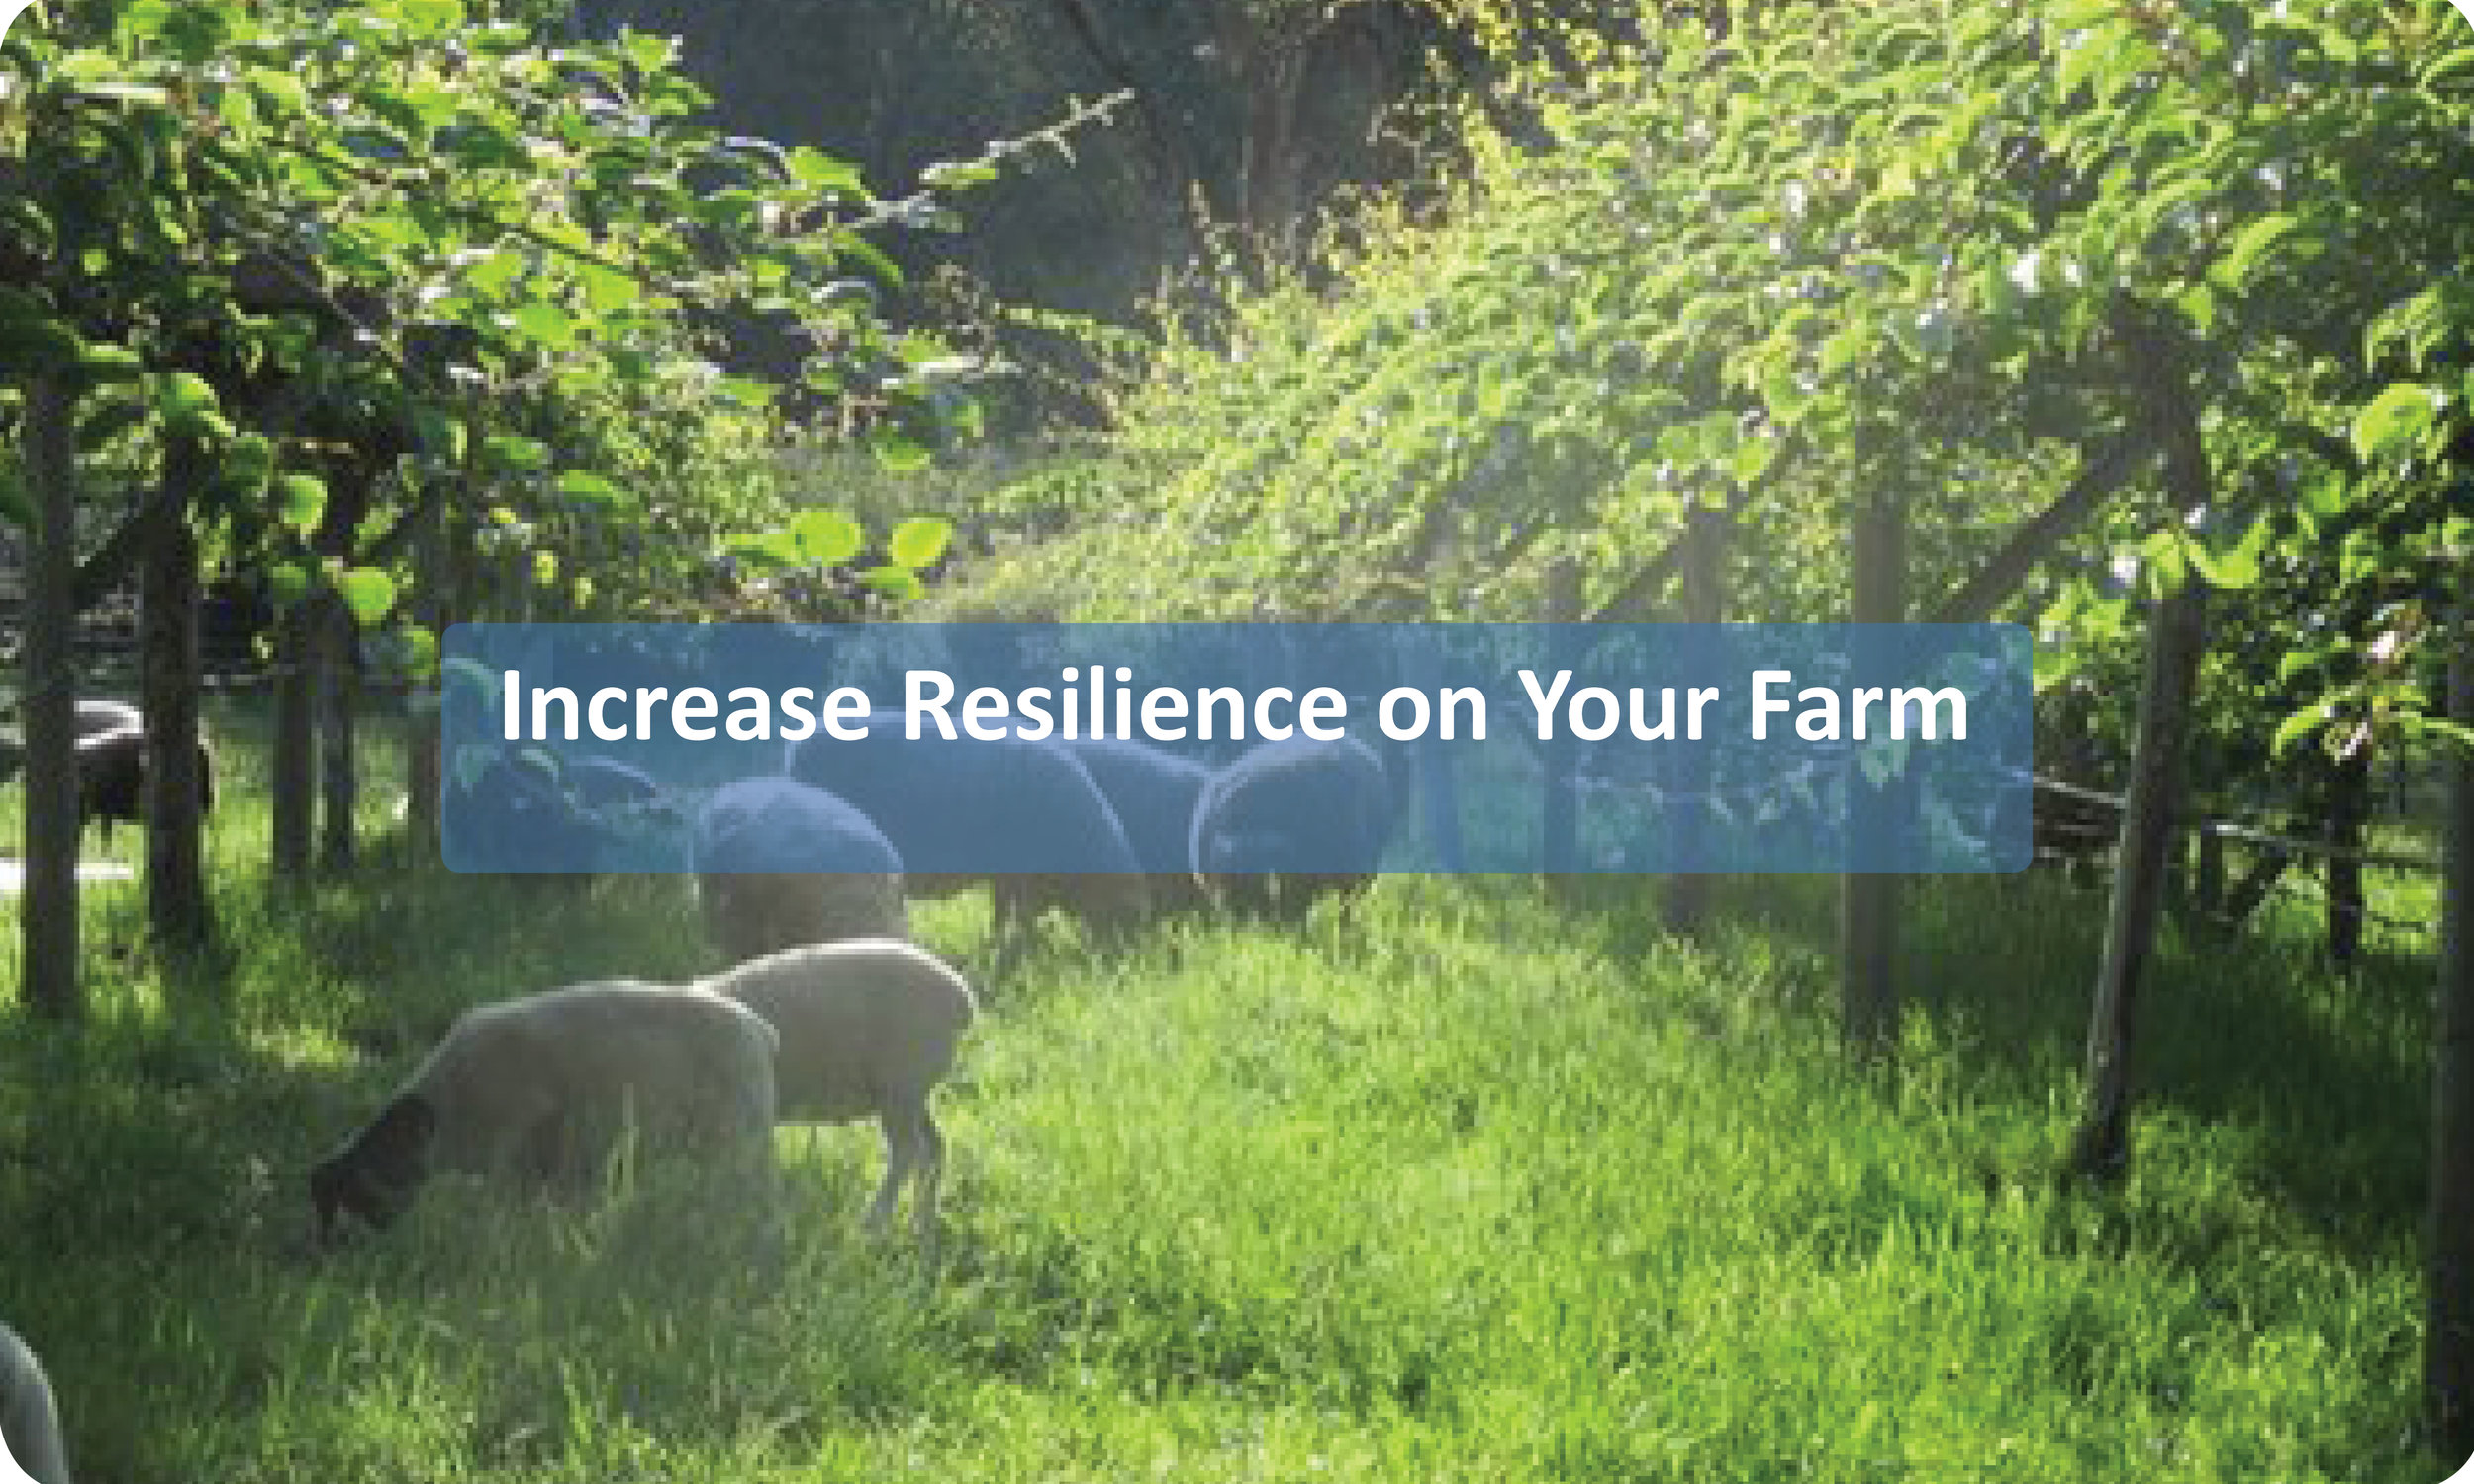 Increase Resilience on Your Farm